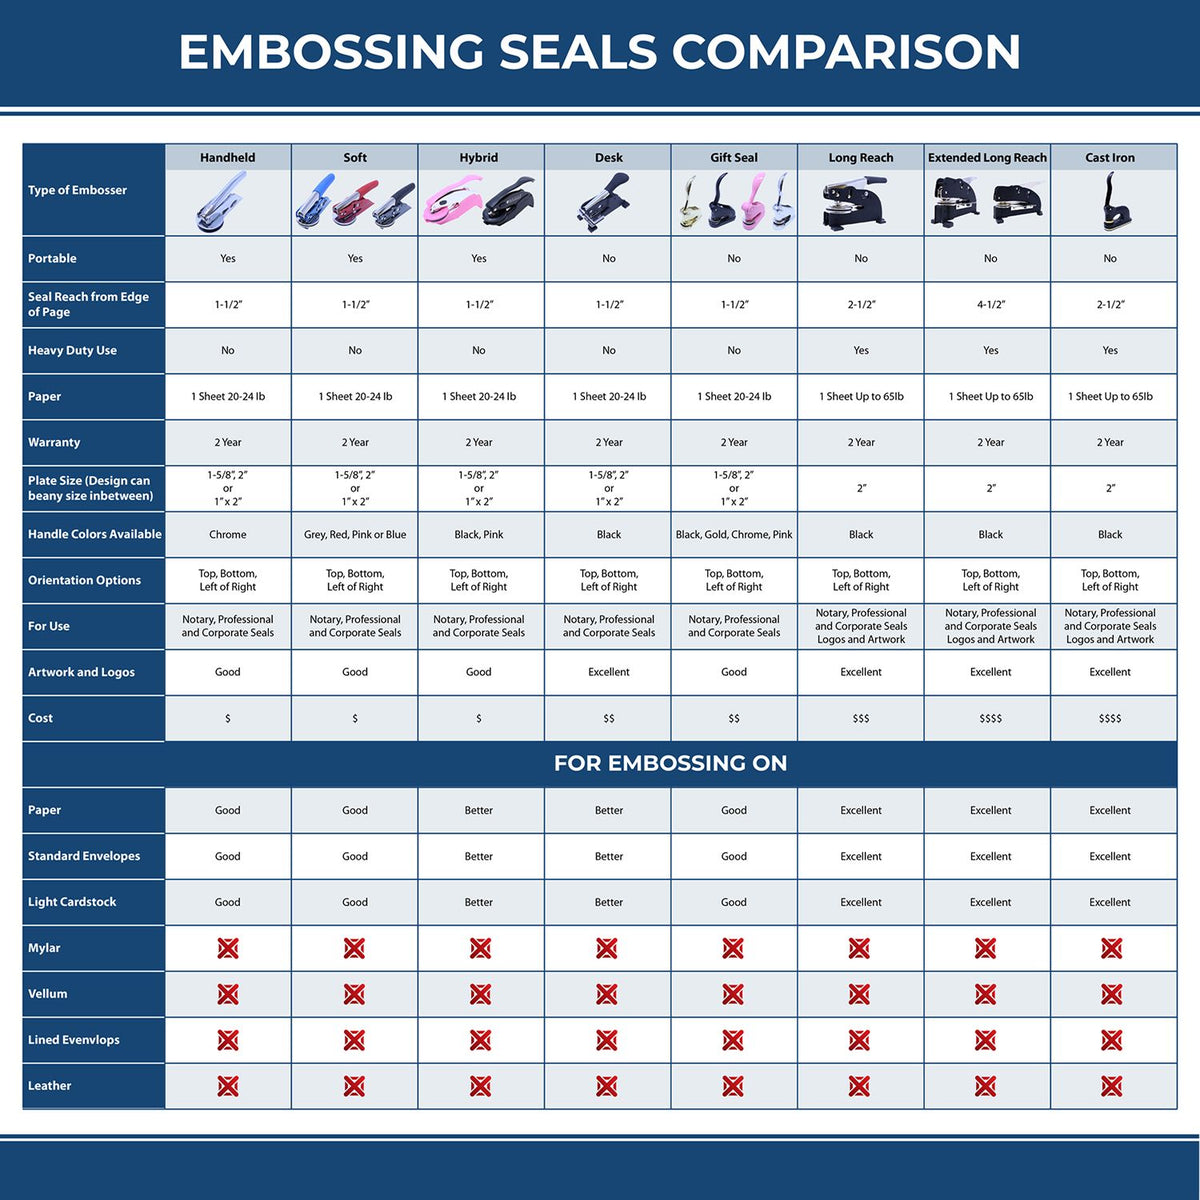 A comparison chart for the different types of mount models available for the Hybrid Connecticut Architect Seal